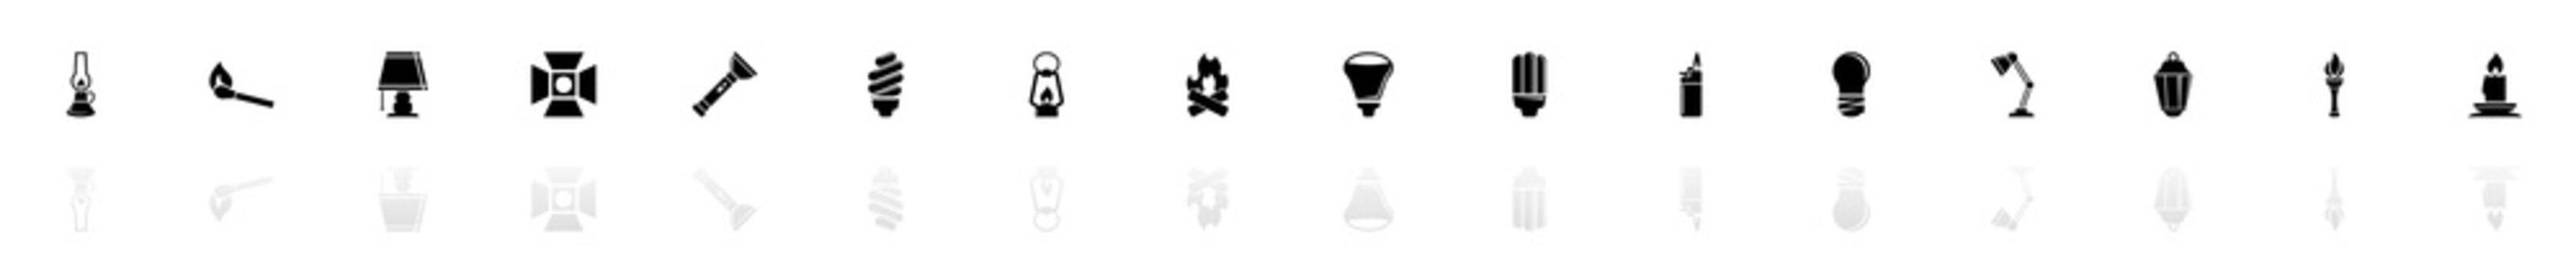 Light Source - Flat Vector Icons